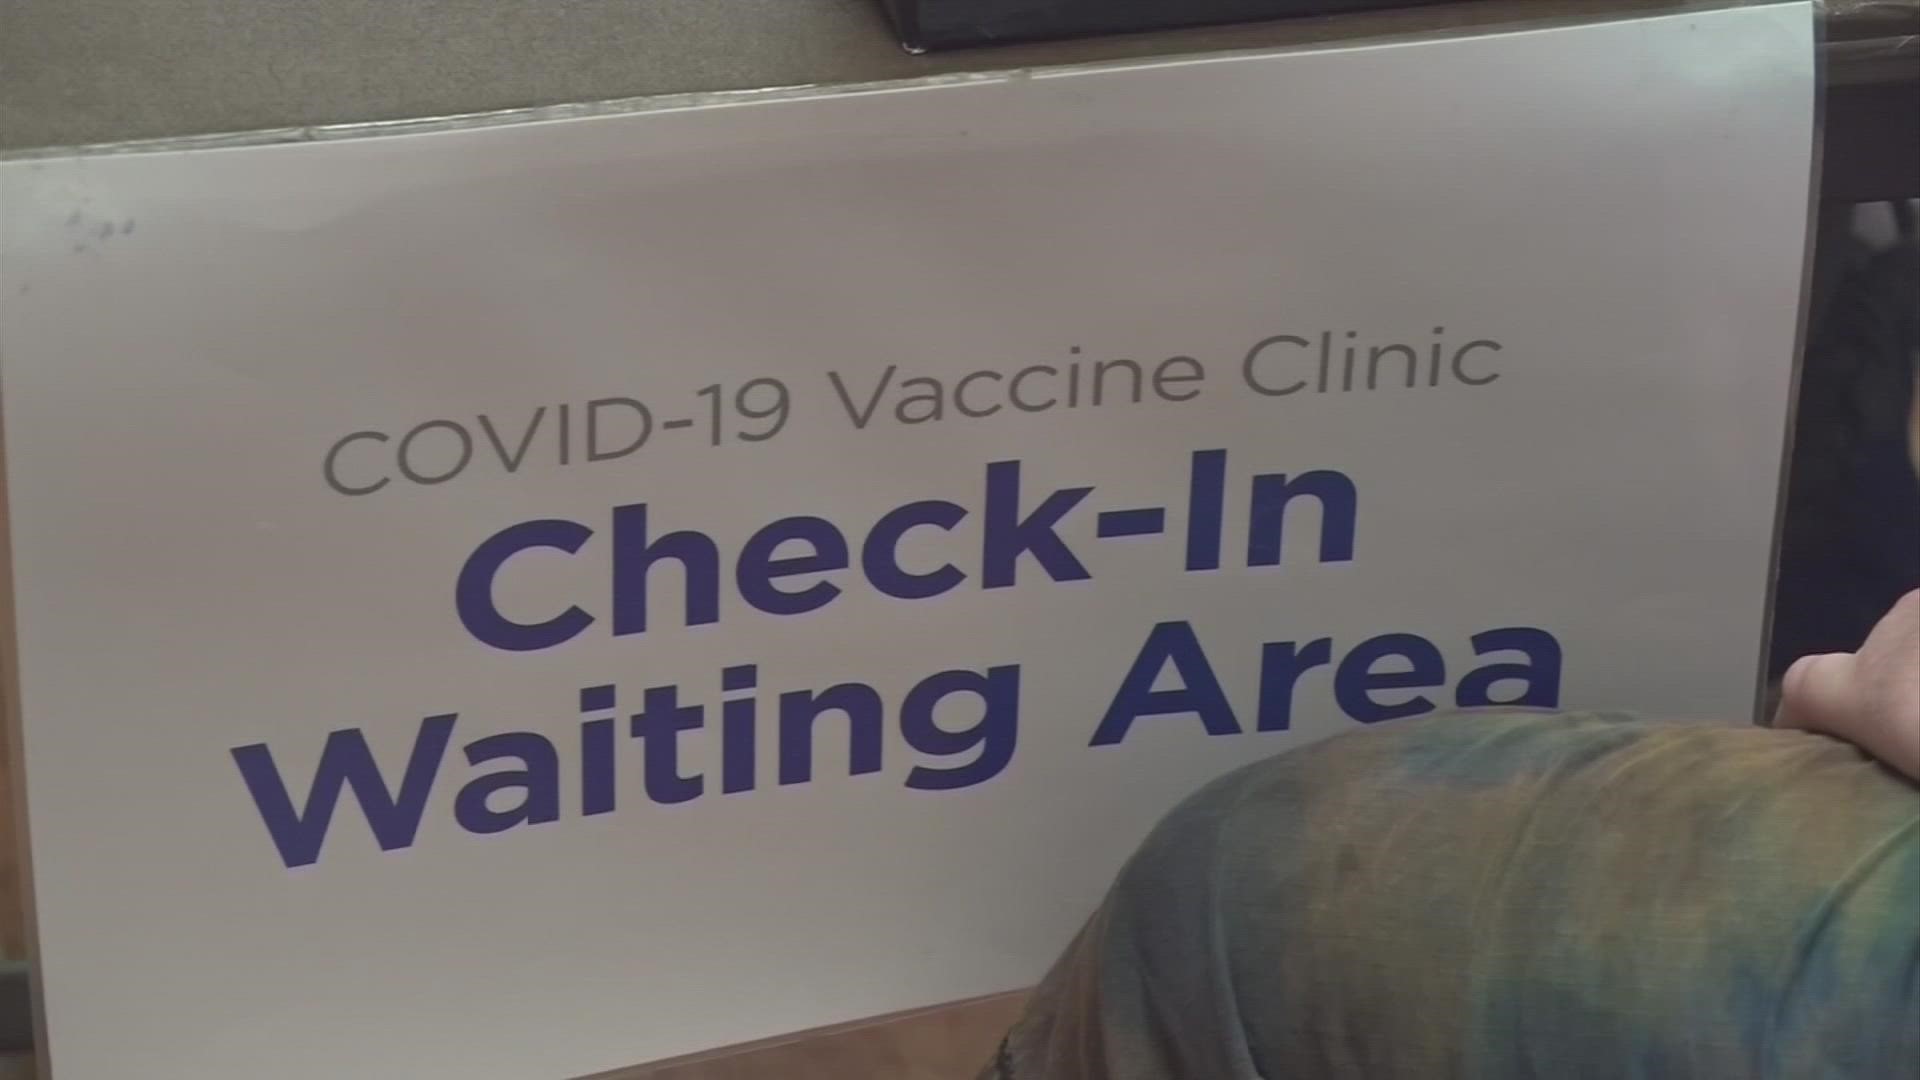 Four weeks ago, in Franklin County, the number of vaccinations Monday through Friday was about 4,300. Last week the total was over 6,800.